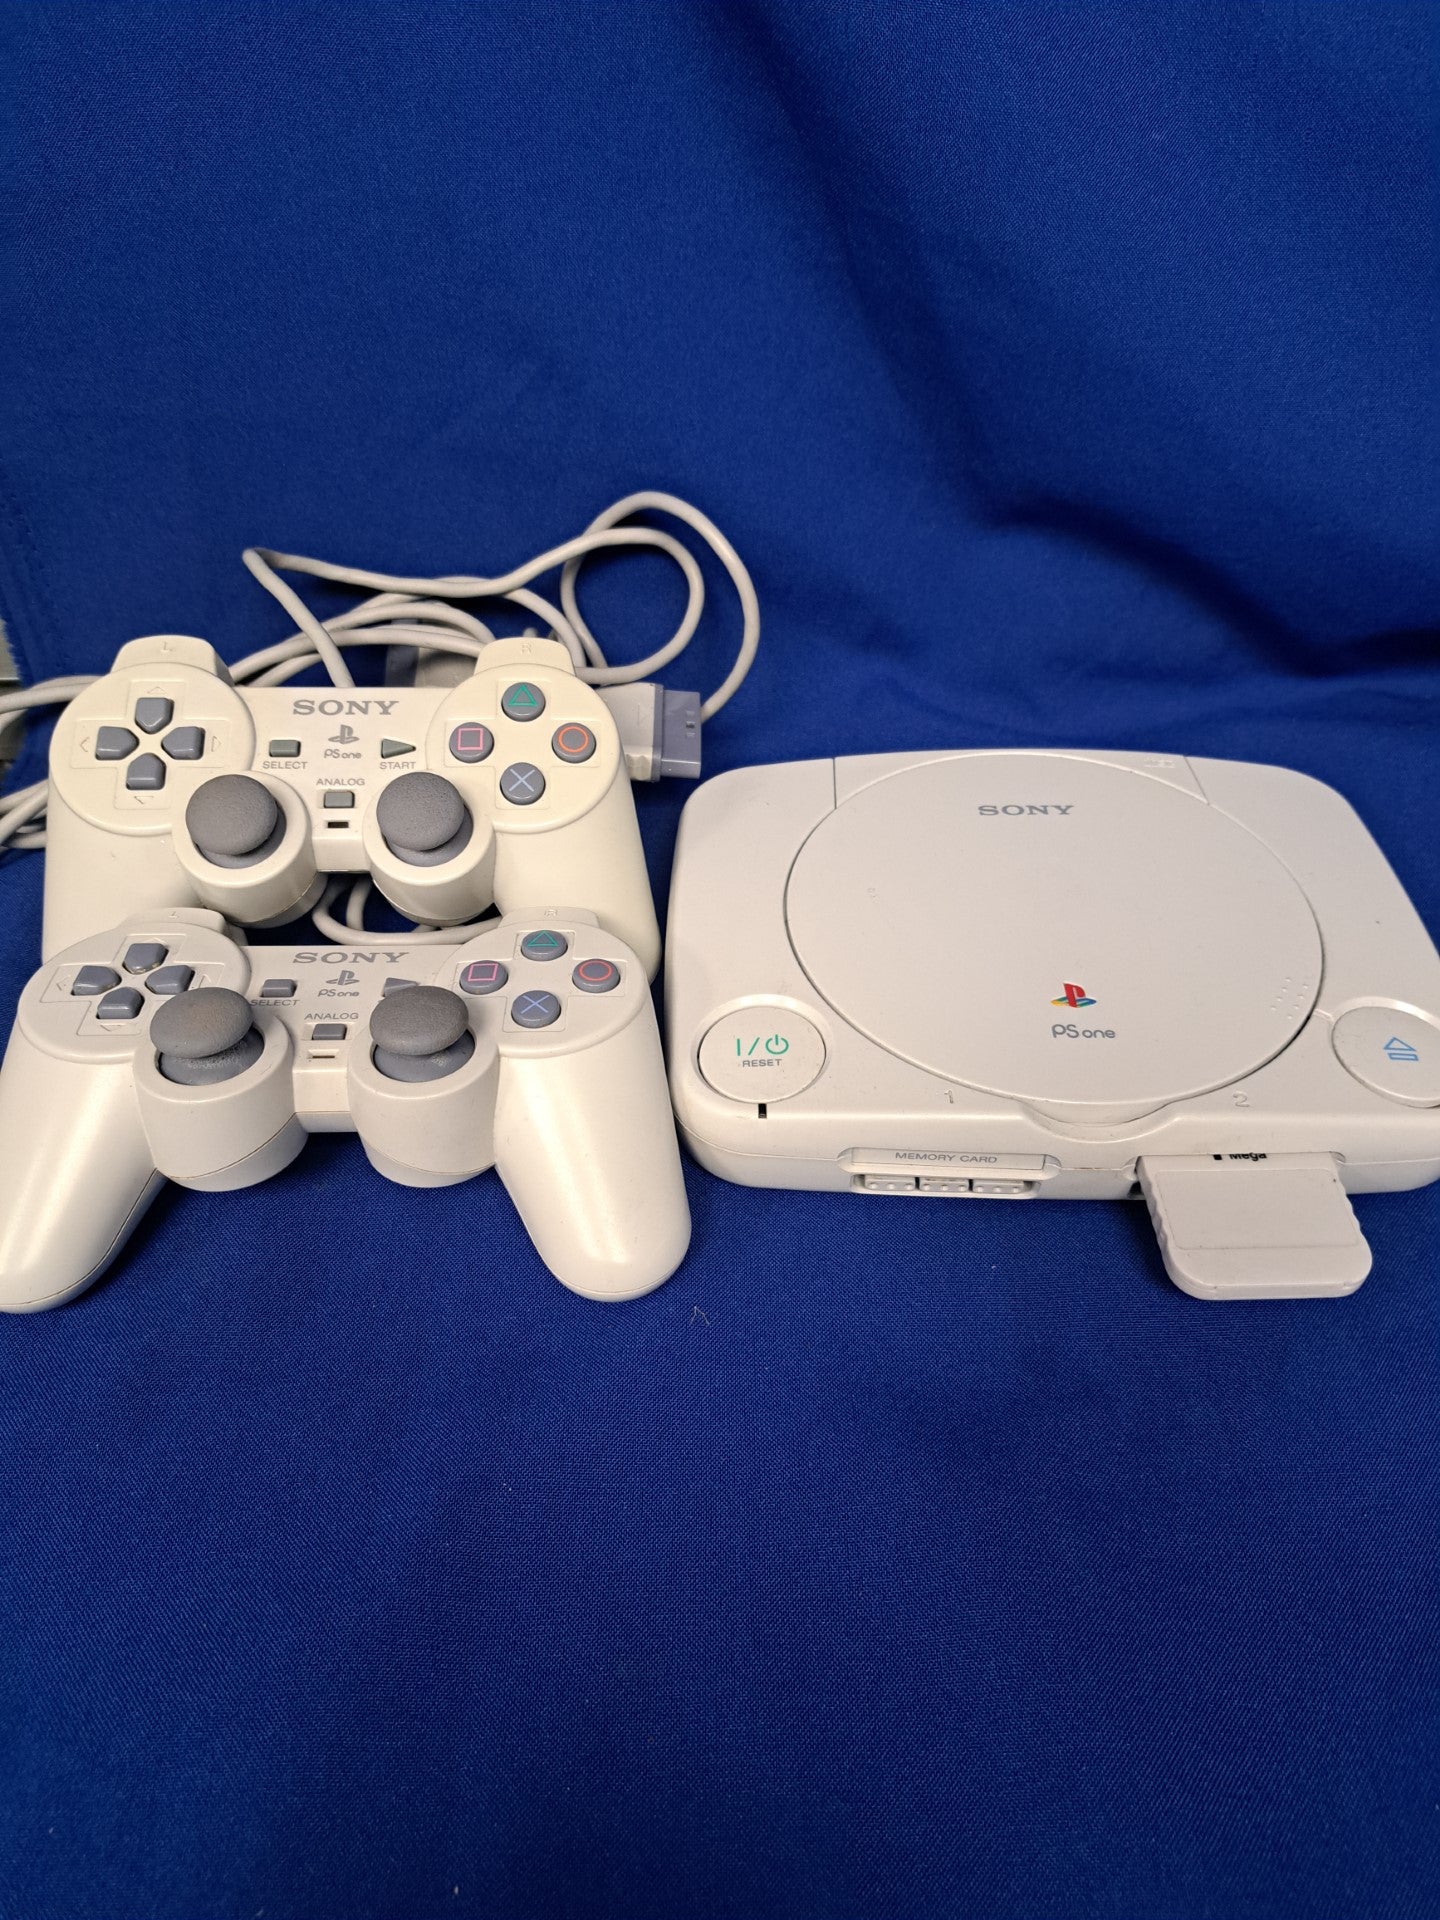 Playstation One Slimline Console - White - With two controllers and Memory Card